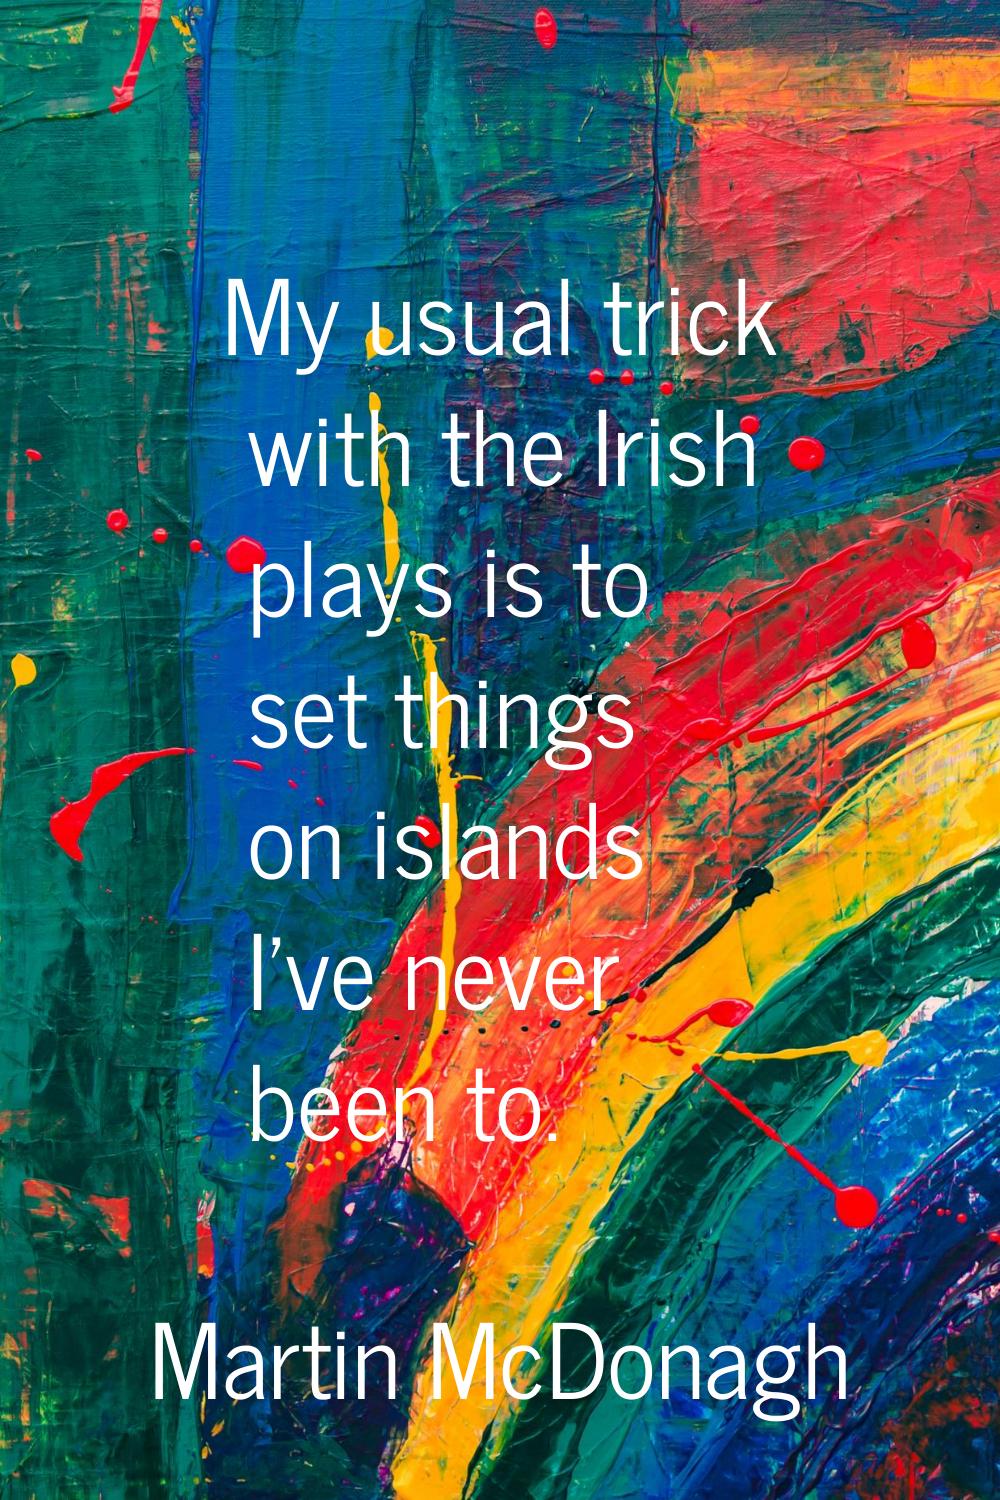 My usual trick with the Irish plays is to set things on islands I've never been to.